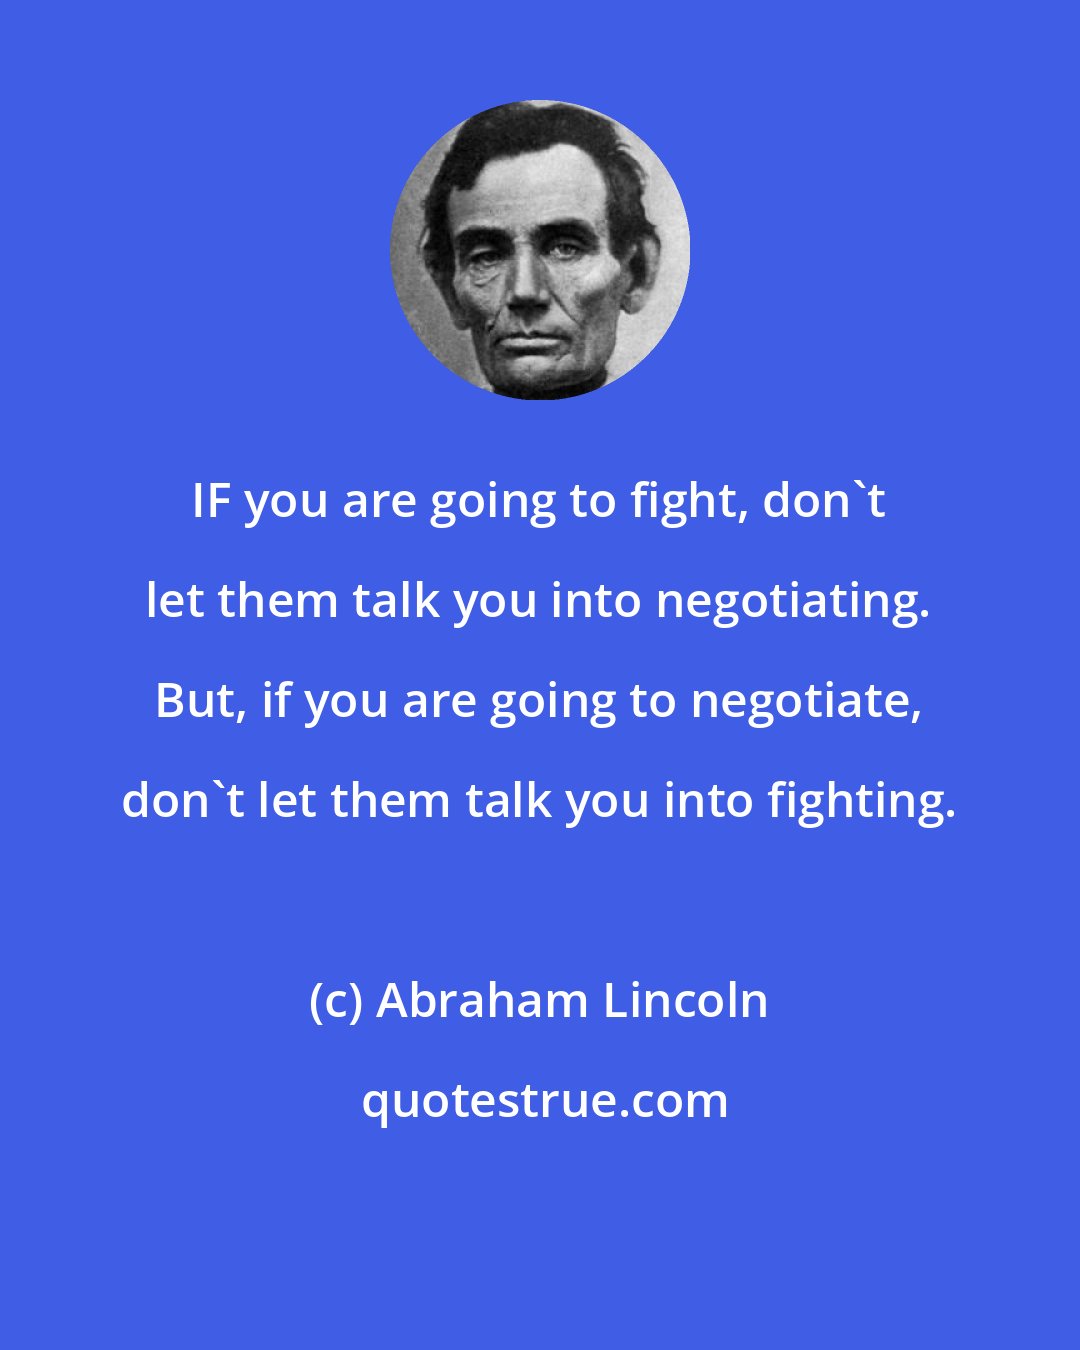 Abraham Lincoln: IF you are going to fight, don't let them talk you into negotiating. But, if you are going to negotiate, don't let them talk you into fighting.